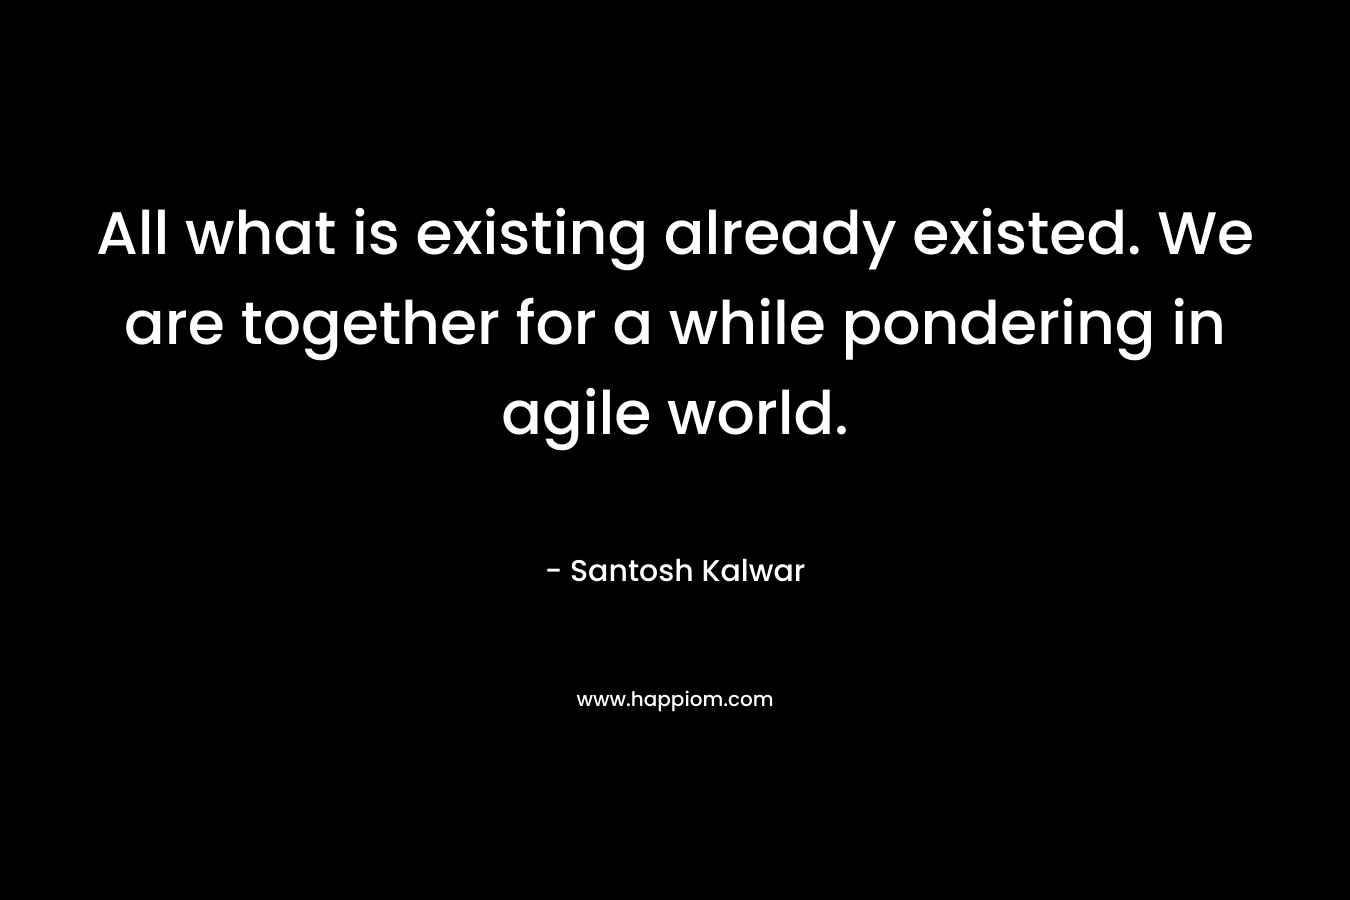 All what is existing already existed. We are together for a while pondering in agile world. – Santosh Kalwar